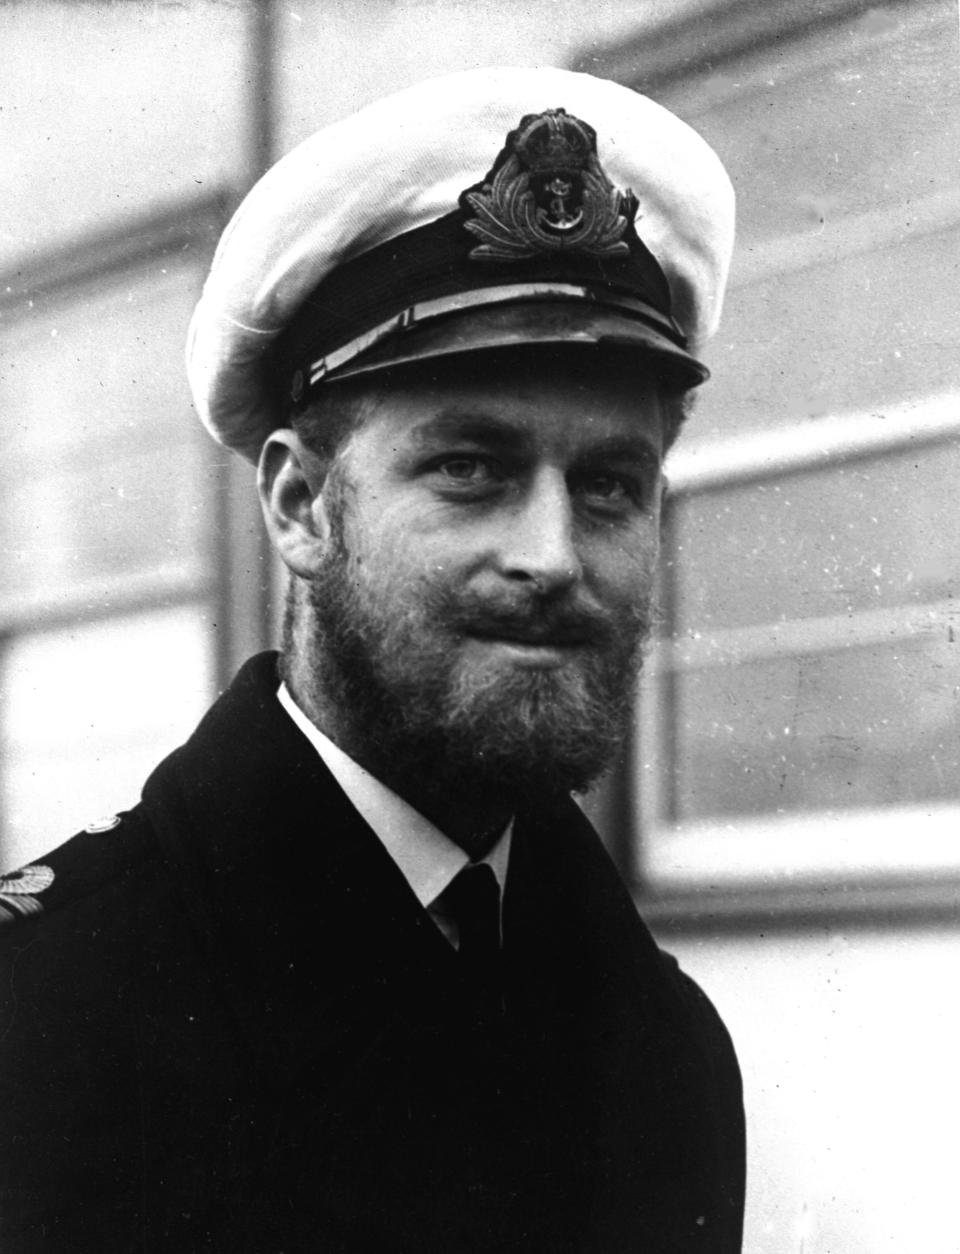 FILE - In this file photo dated August 29 1945, Prince Philip of Greece, now Britain's Duke of Edinburgh, during a naval visit to Melbourne, Australia. Prince Philip who died Friday April 9, 2021, aged 99, lived through a tumultuous century of war and upheavals, but he helped forge a period of stability for the British monarchy under his wife, Queen Elizabeth II. Philip joined the Royal Navy and saw action during World War II on battleships in the Indian Ocean, the Mediterranean and the Pacific. (AP Photo, FILE)